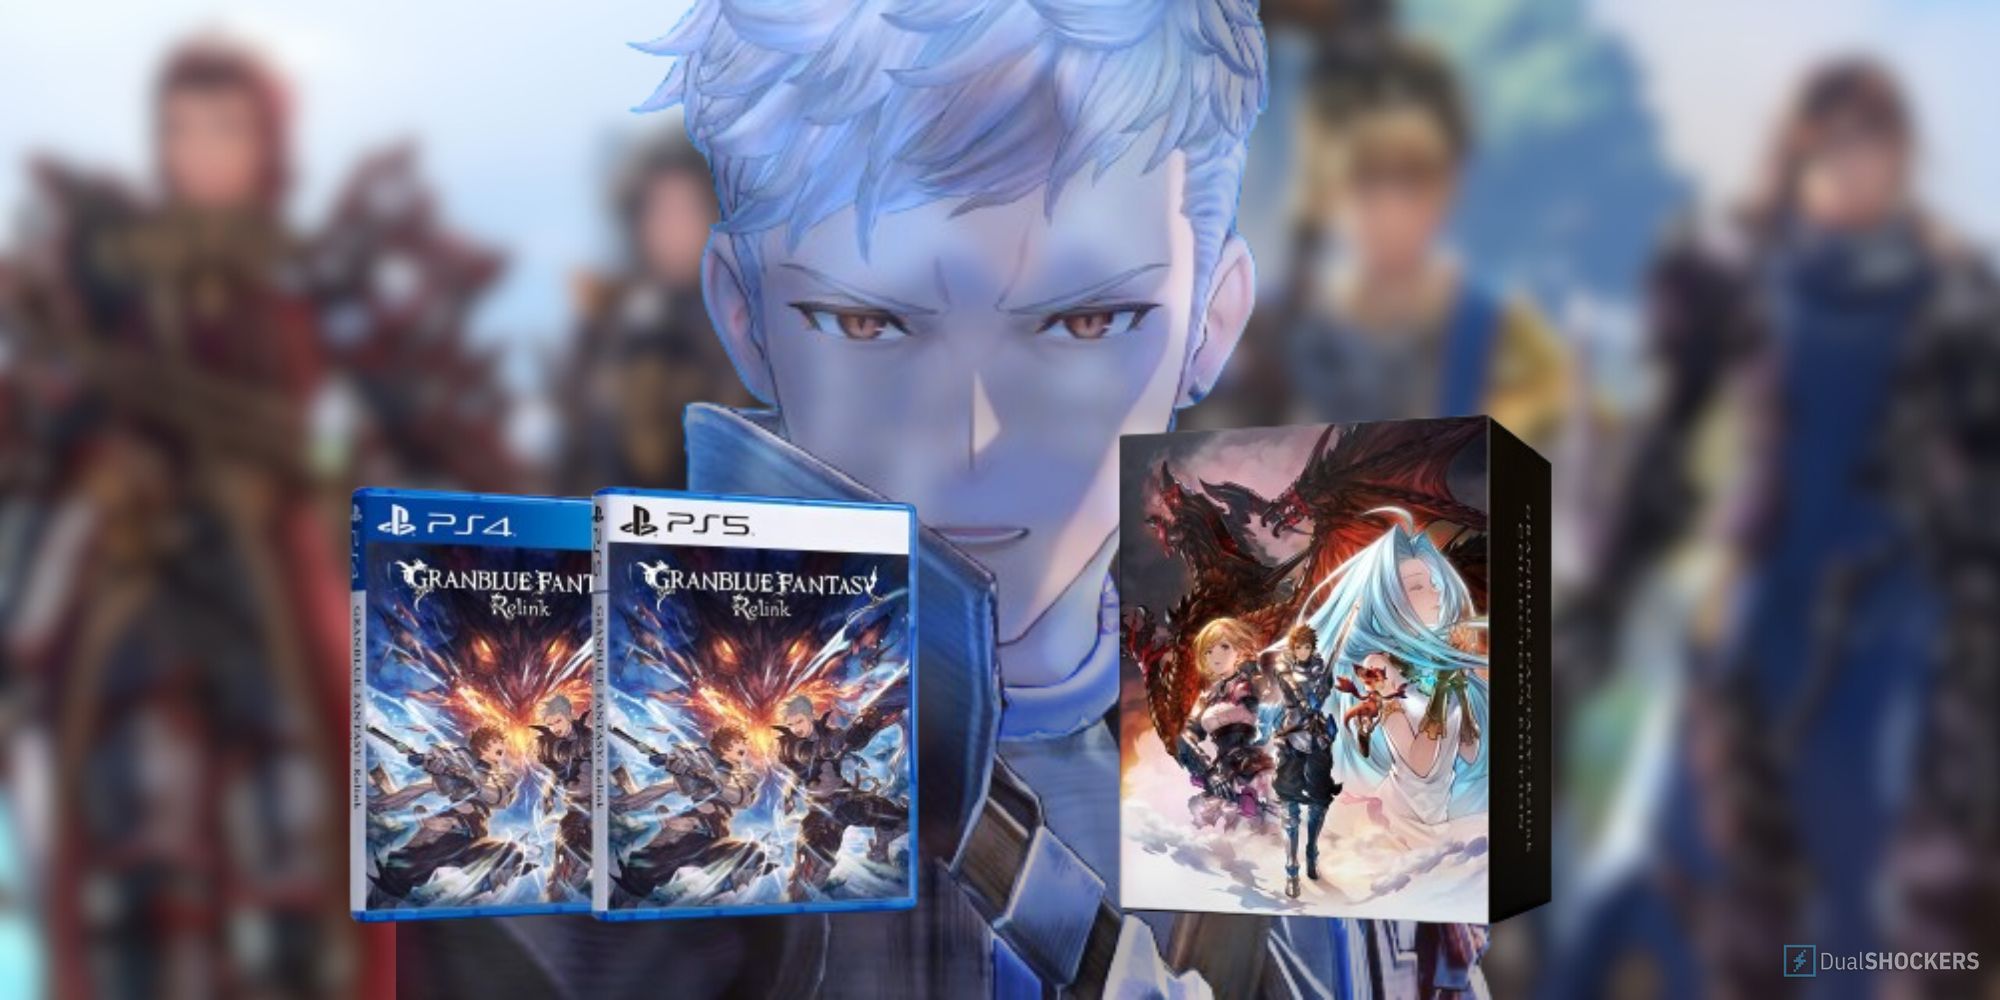 Granblue Fantasy: Relink PS4 PS5 covers and deluxe box edition